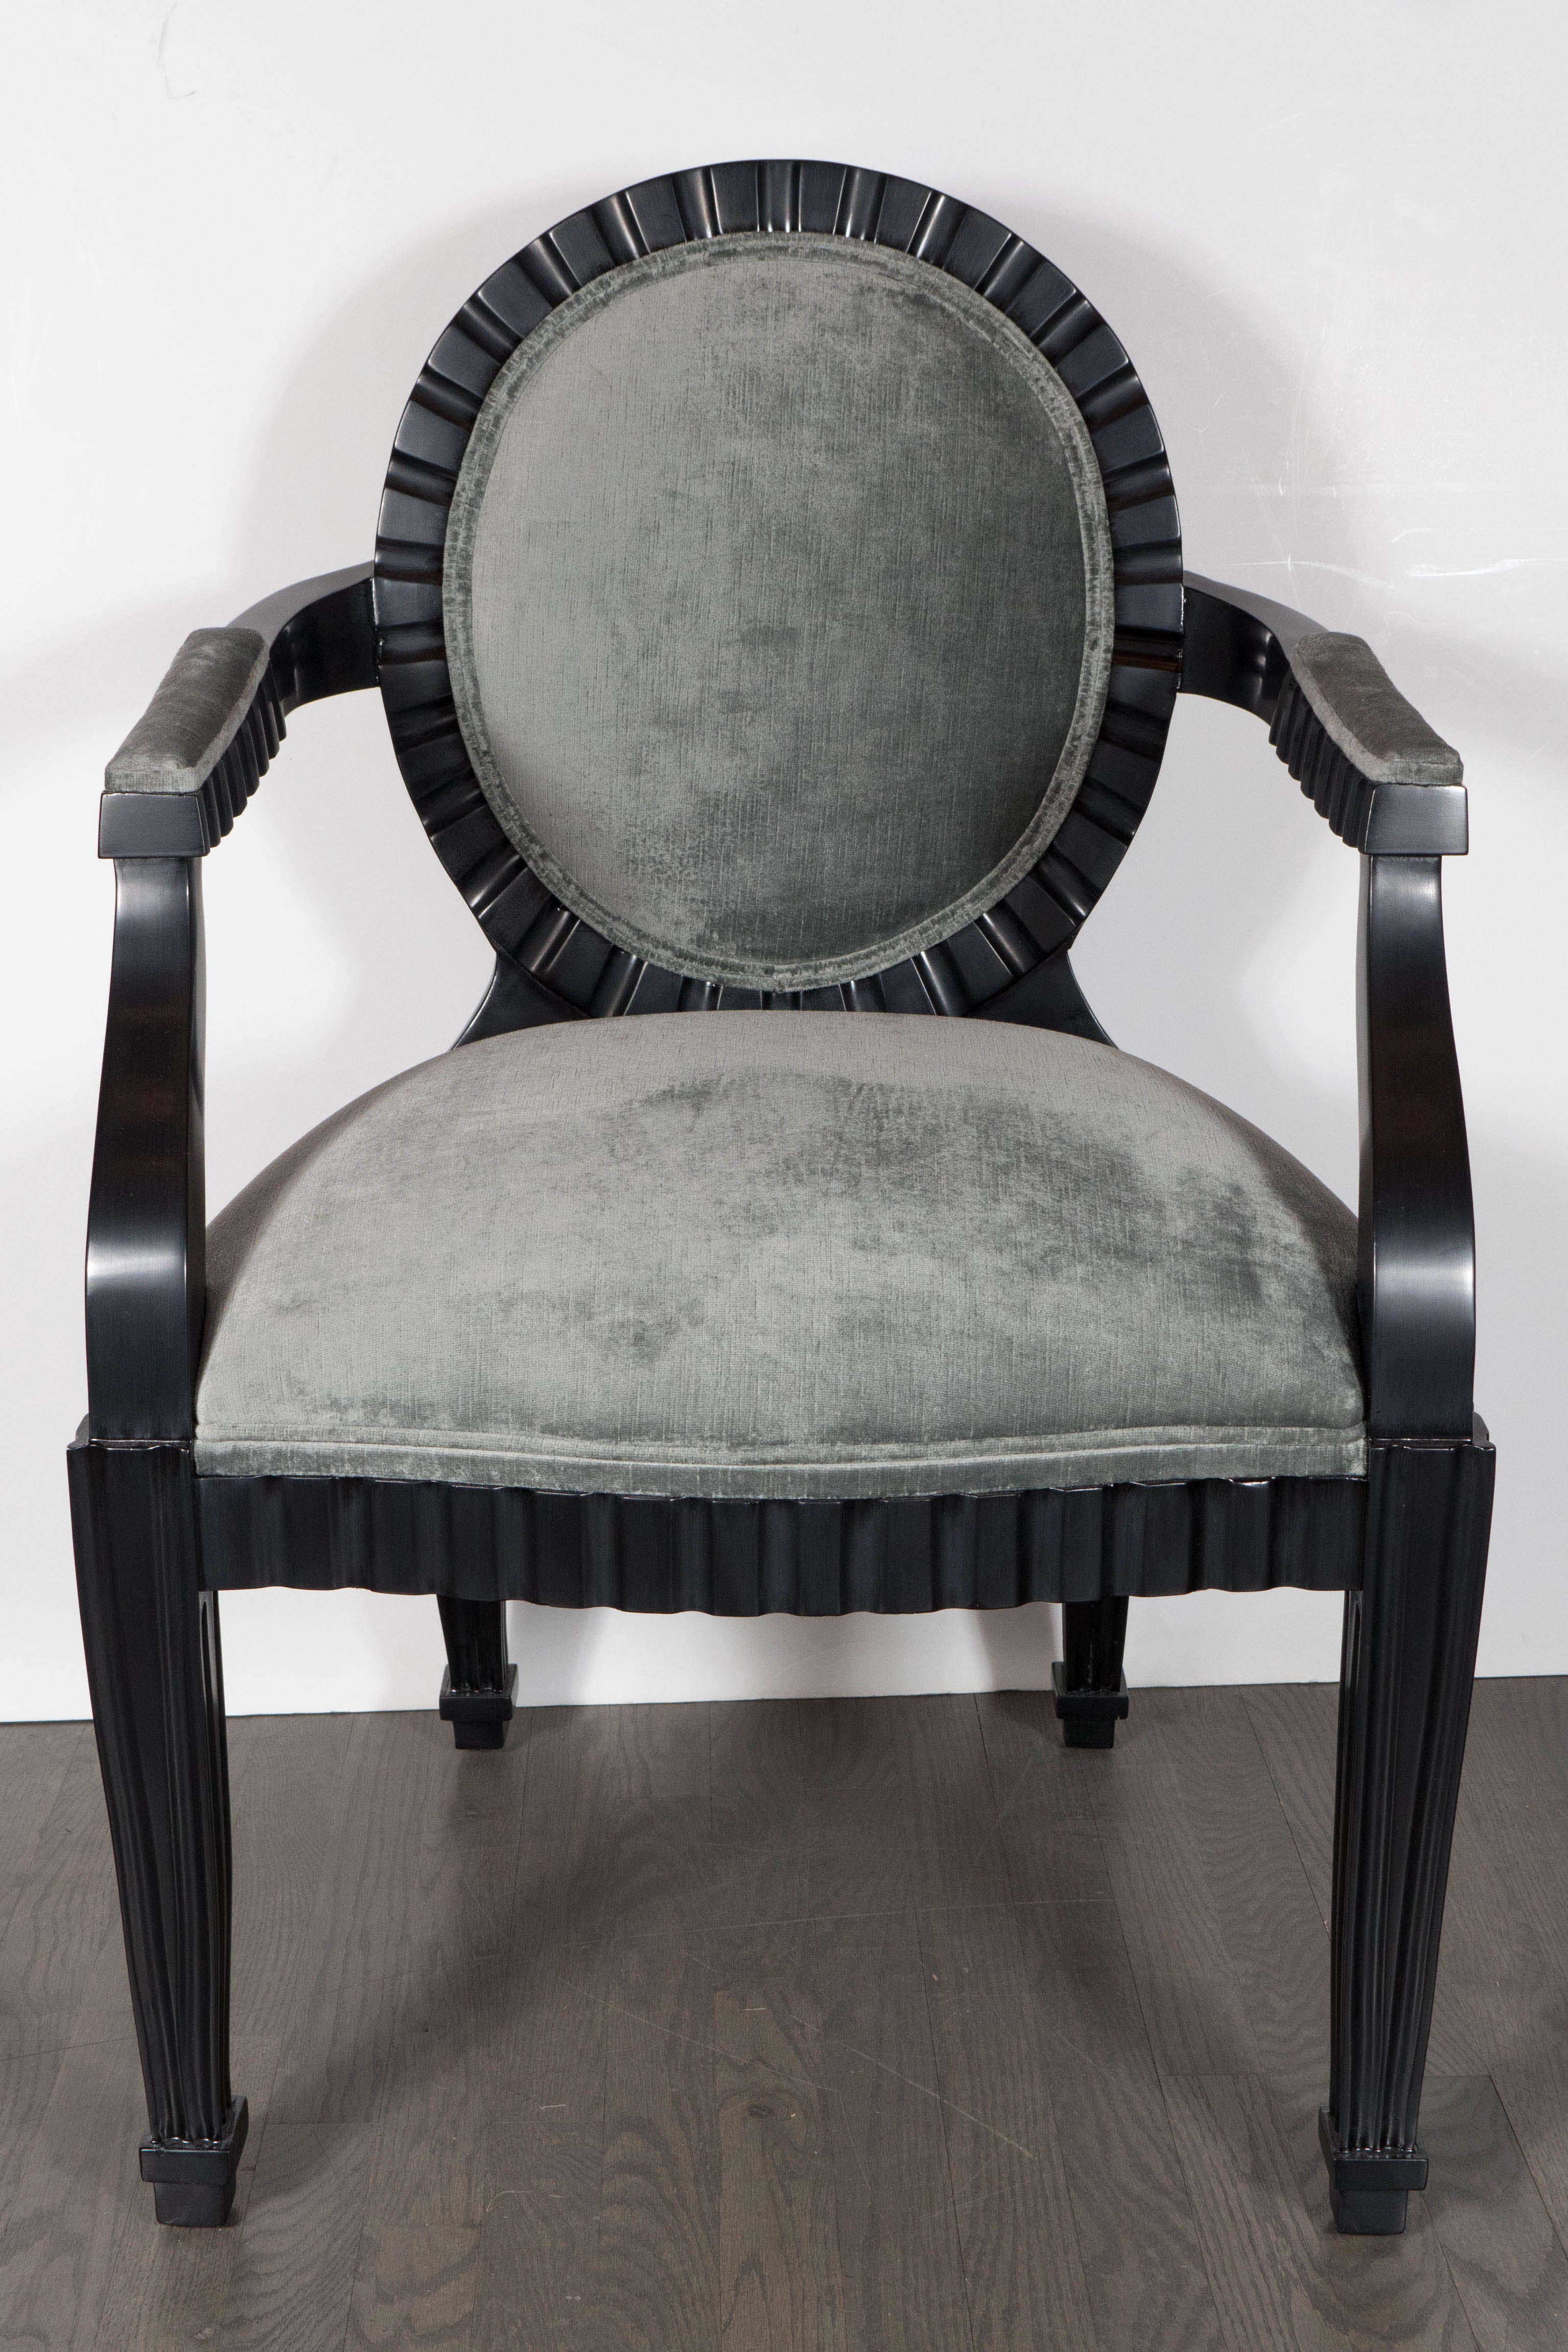 This stunning pair of modernist chairs were realized by the esteemed designer Donghia in the United States, circa 1980. They feature ebonized walnut bodies with circular backs, conical legs and scalloped channel detailing that runs around the border